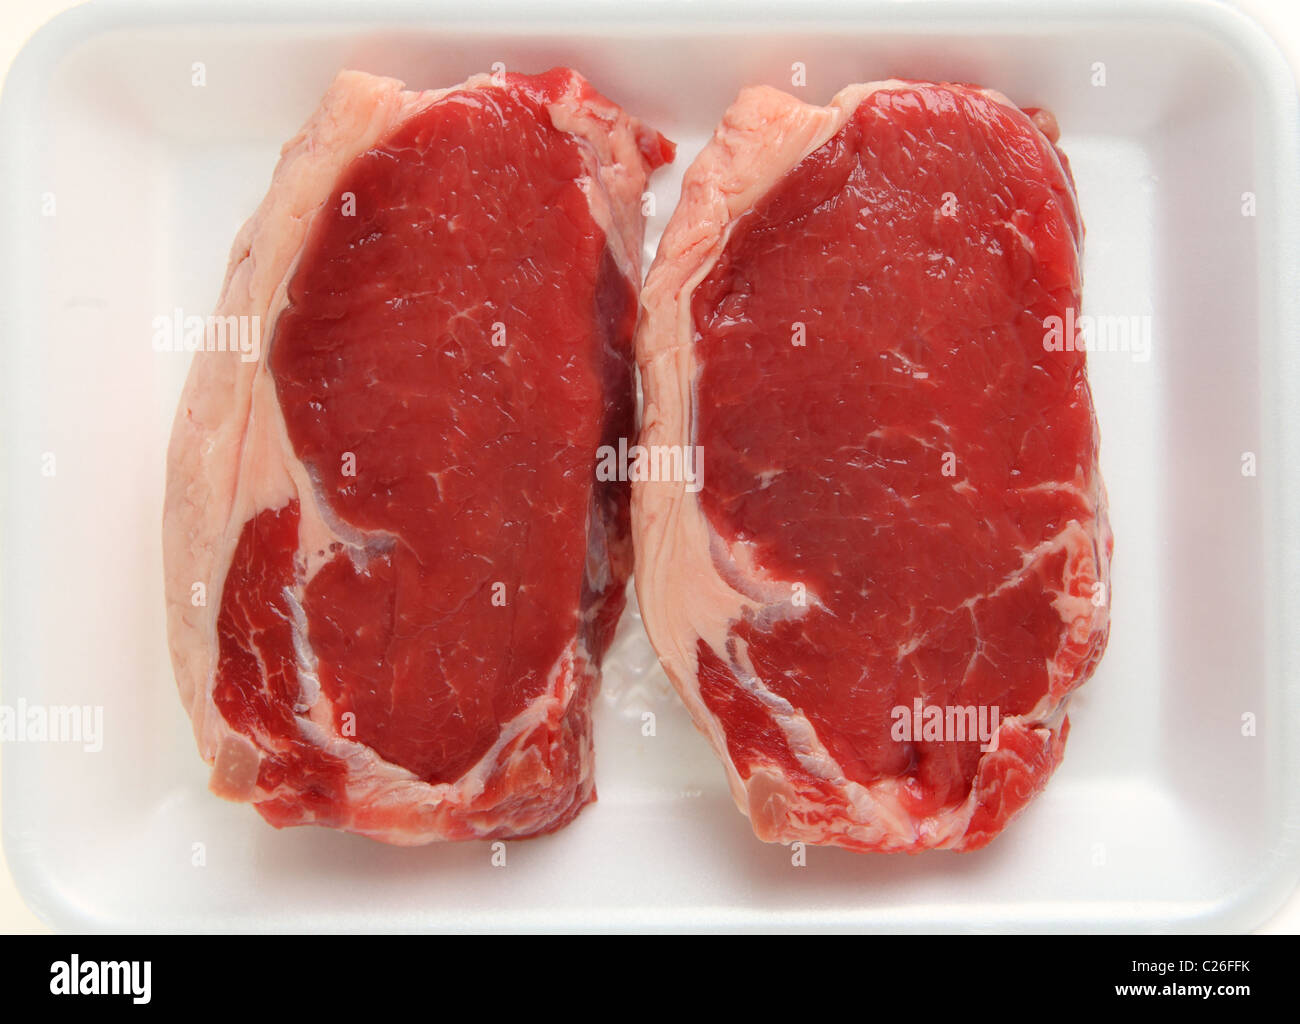 Two raw veal sirloin steaks on a supermarket butchers' tray Stock Photo